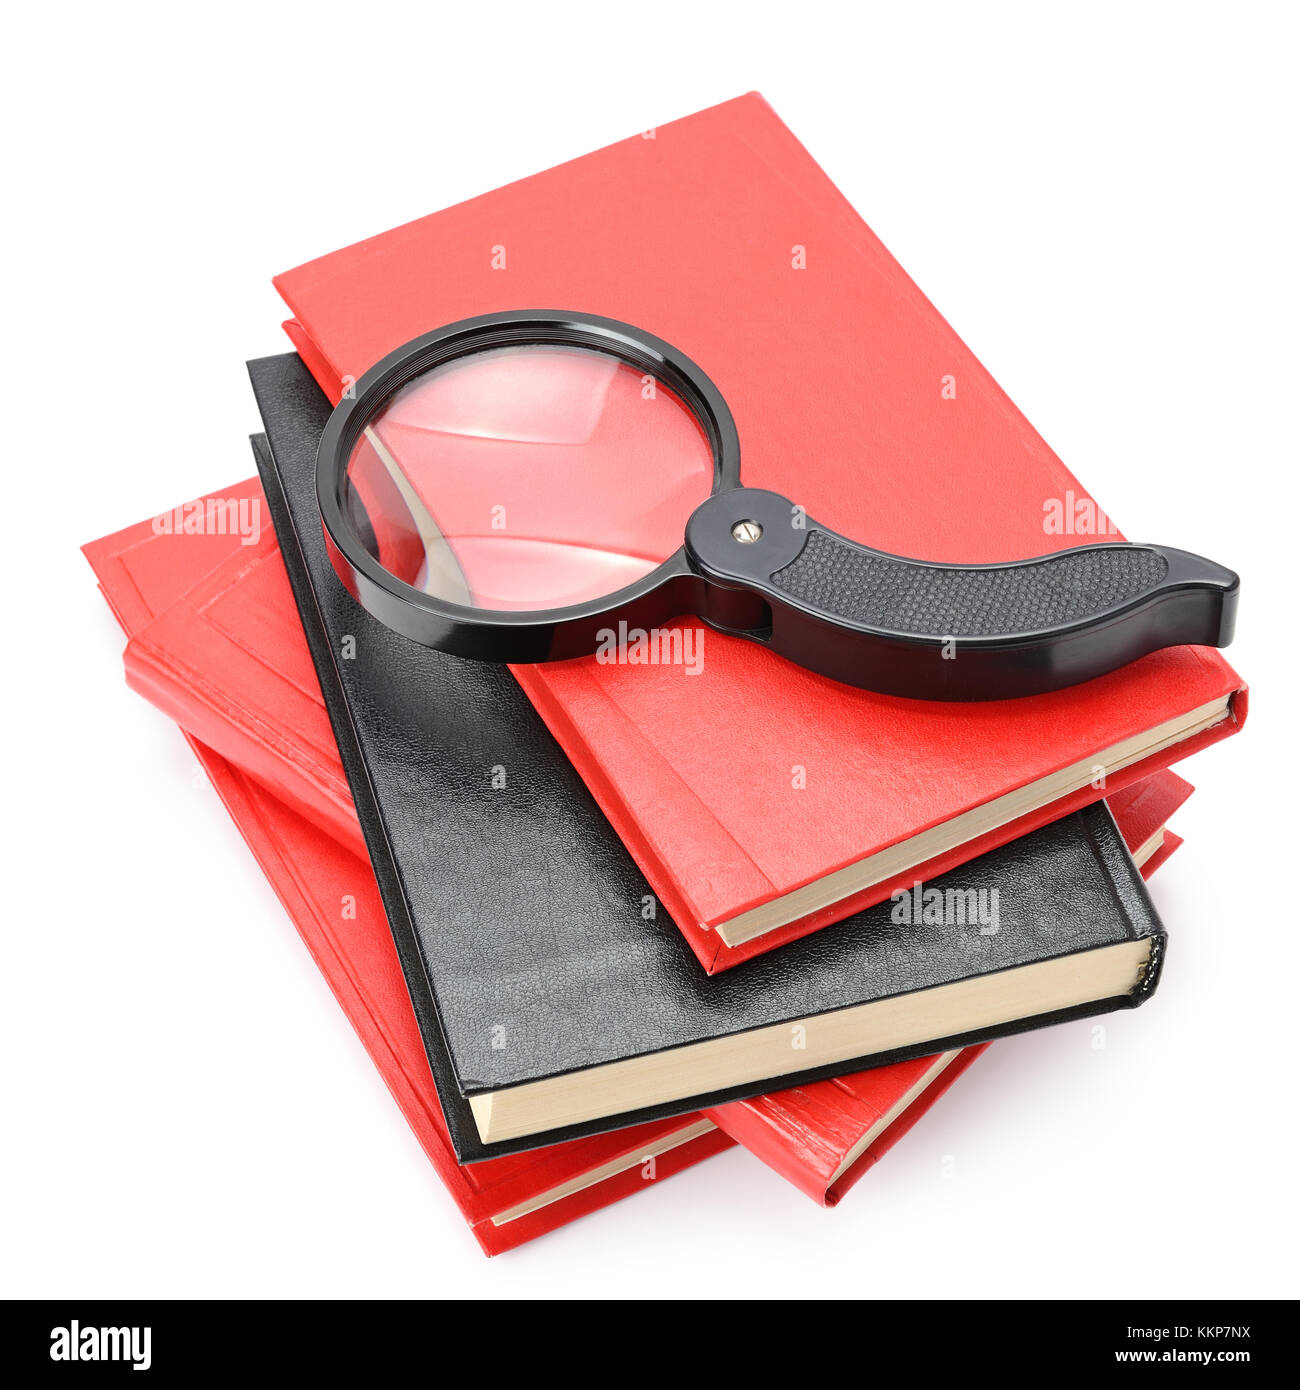 Large magnifier on book stack isolated on white. Stock Photo